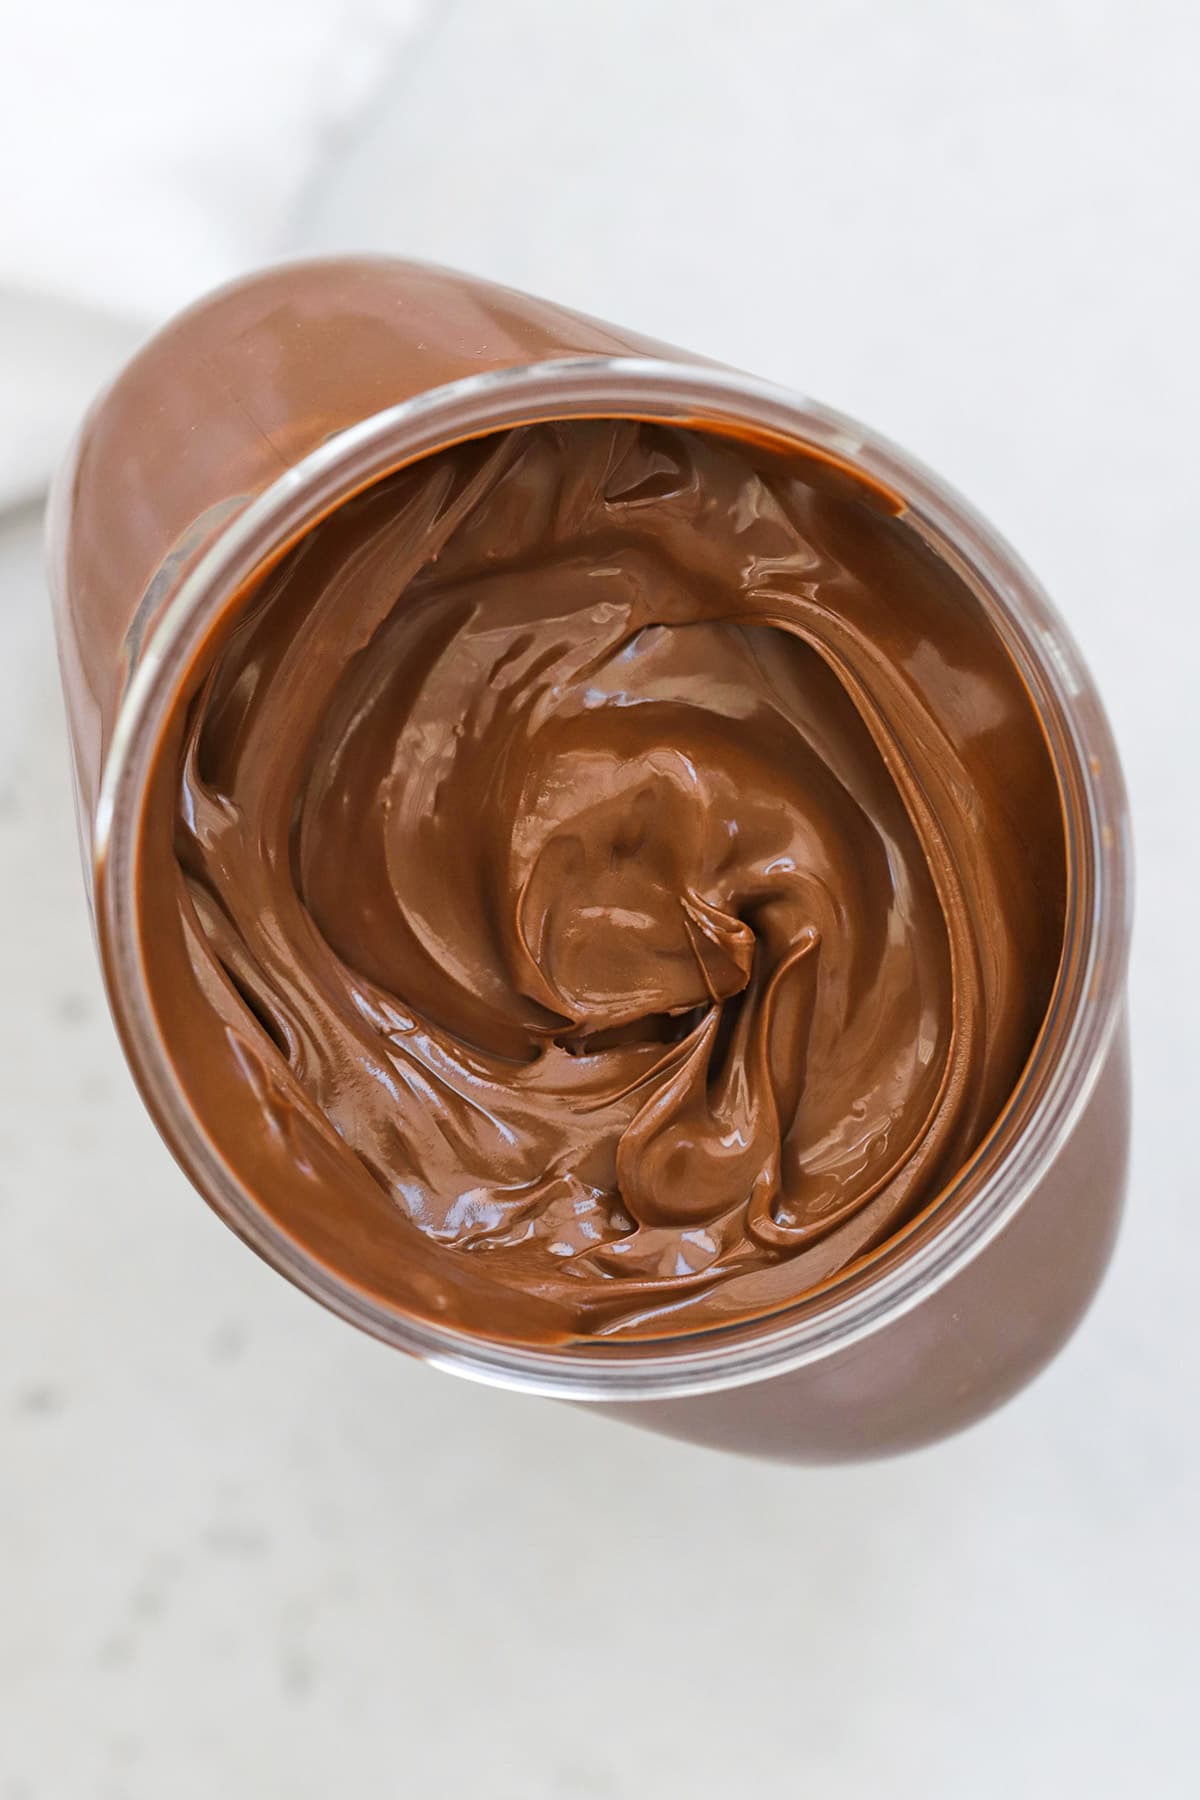 Overhead view of a jar of Nutella